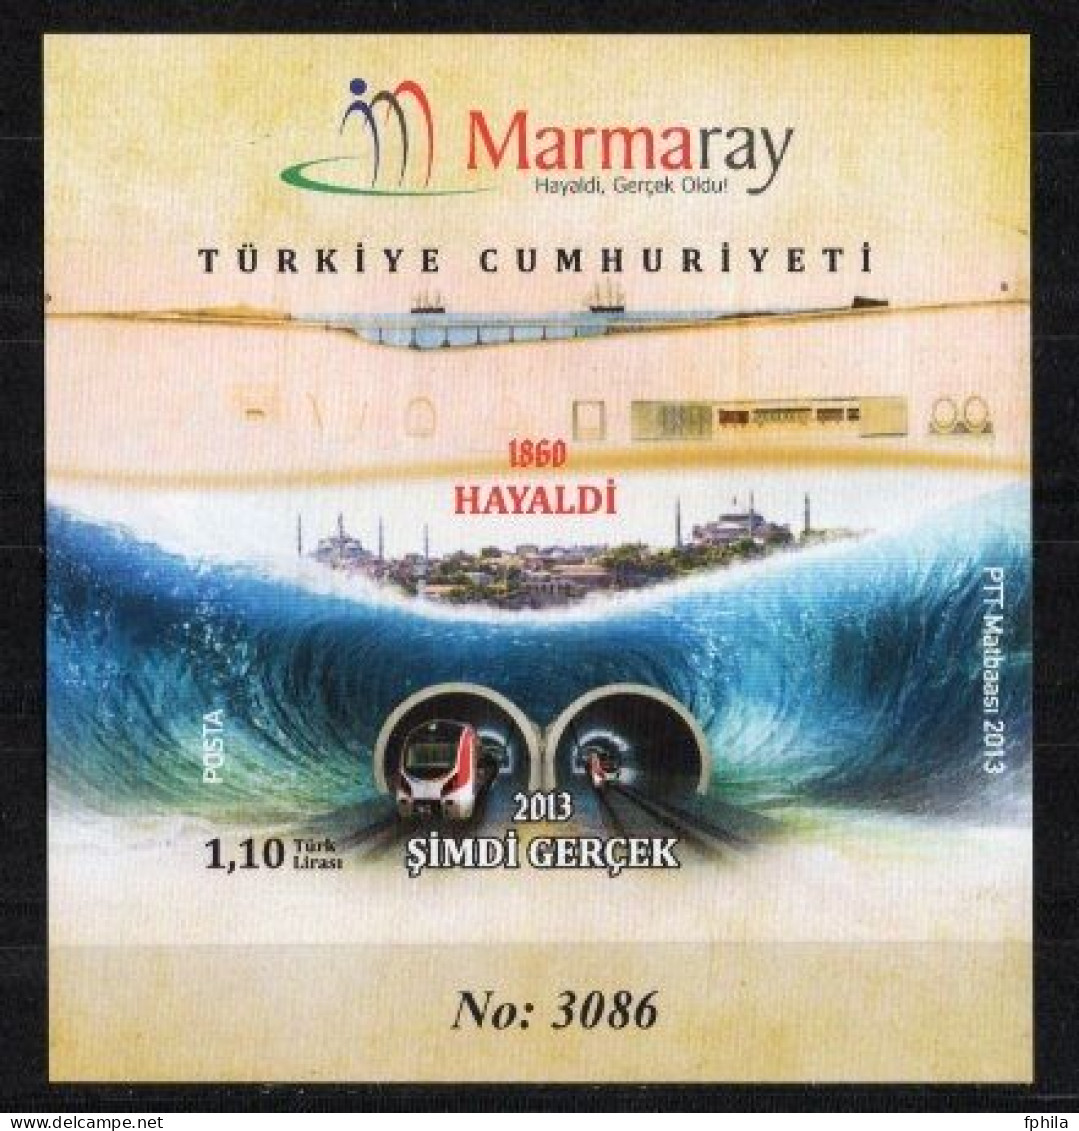 2013 TURKEY MARMARAY WAS ONCE A DREAM, NOW IT'S REALITY - TRAINS , SUBWAY IMPERFORATED SOUVENIR SHEET MNH ** - Blokken & Velletjes